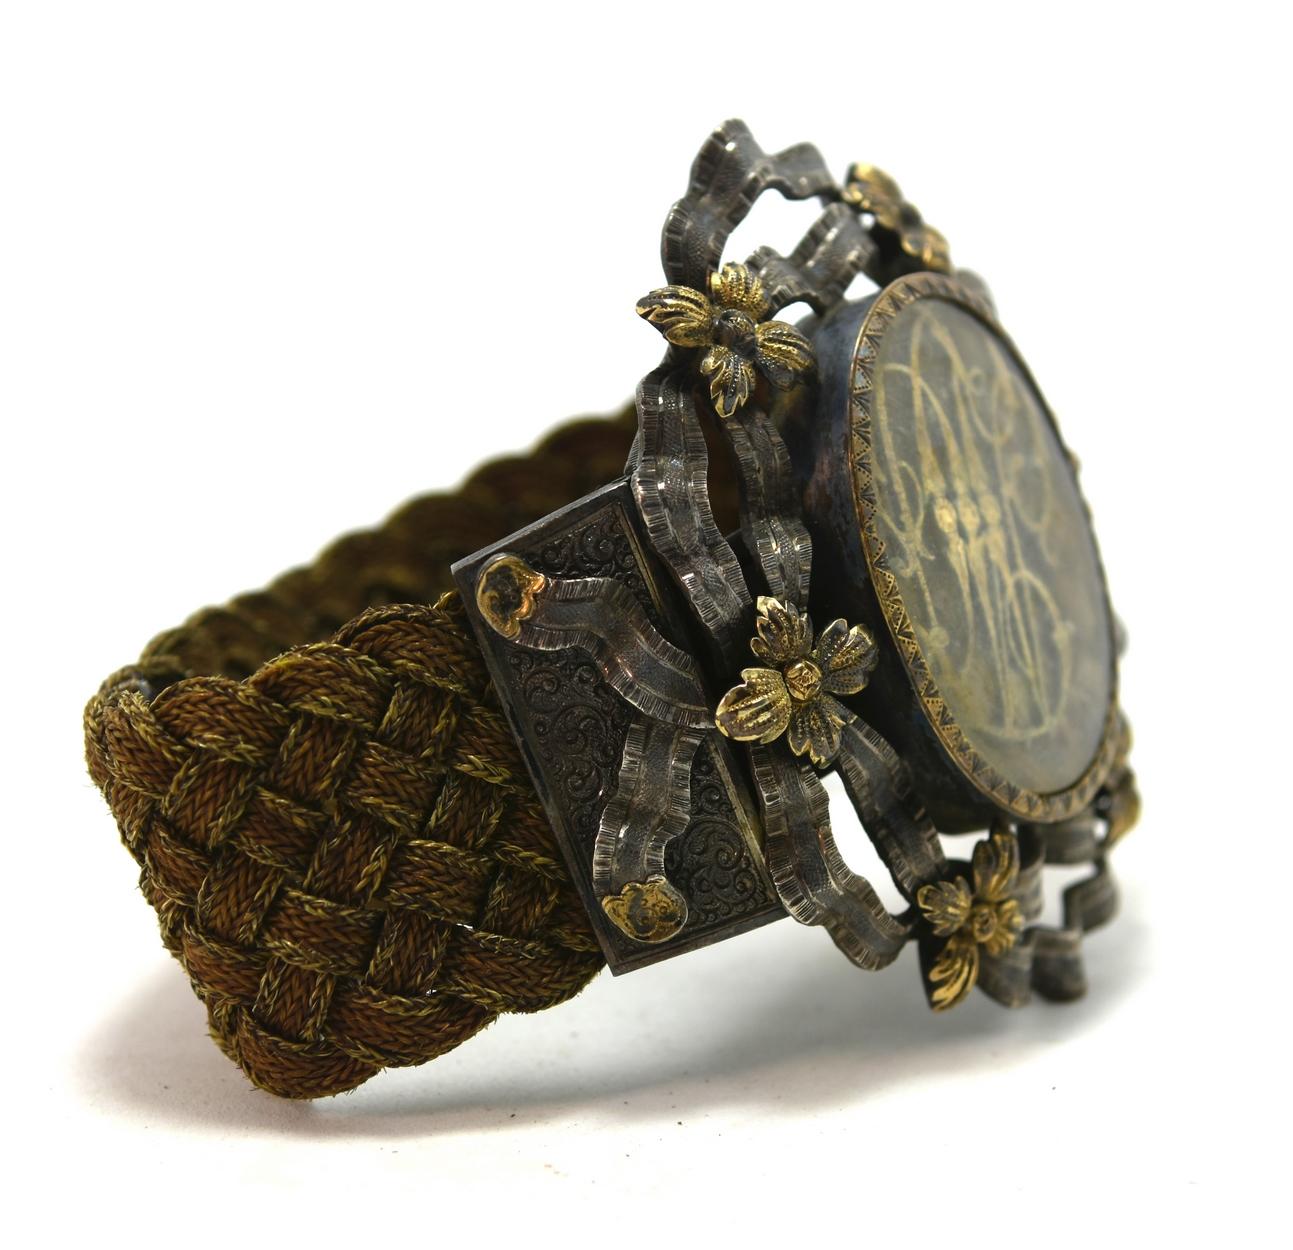 19th century silver and vermeil bracelet with golden initials decorated with golden flowers and ribbons. Braided hair bracelet.